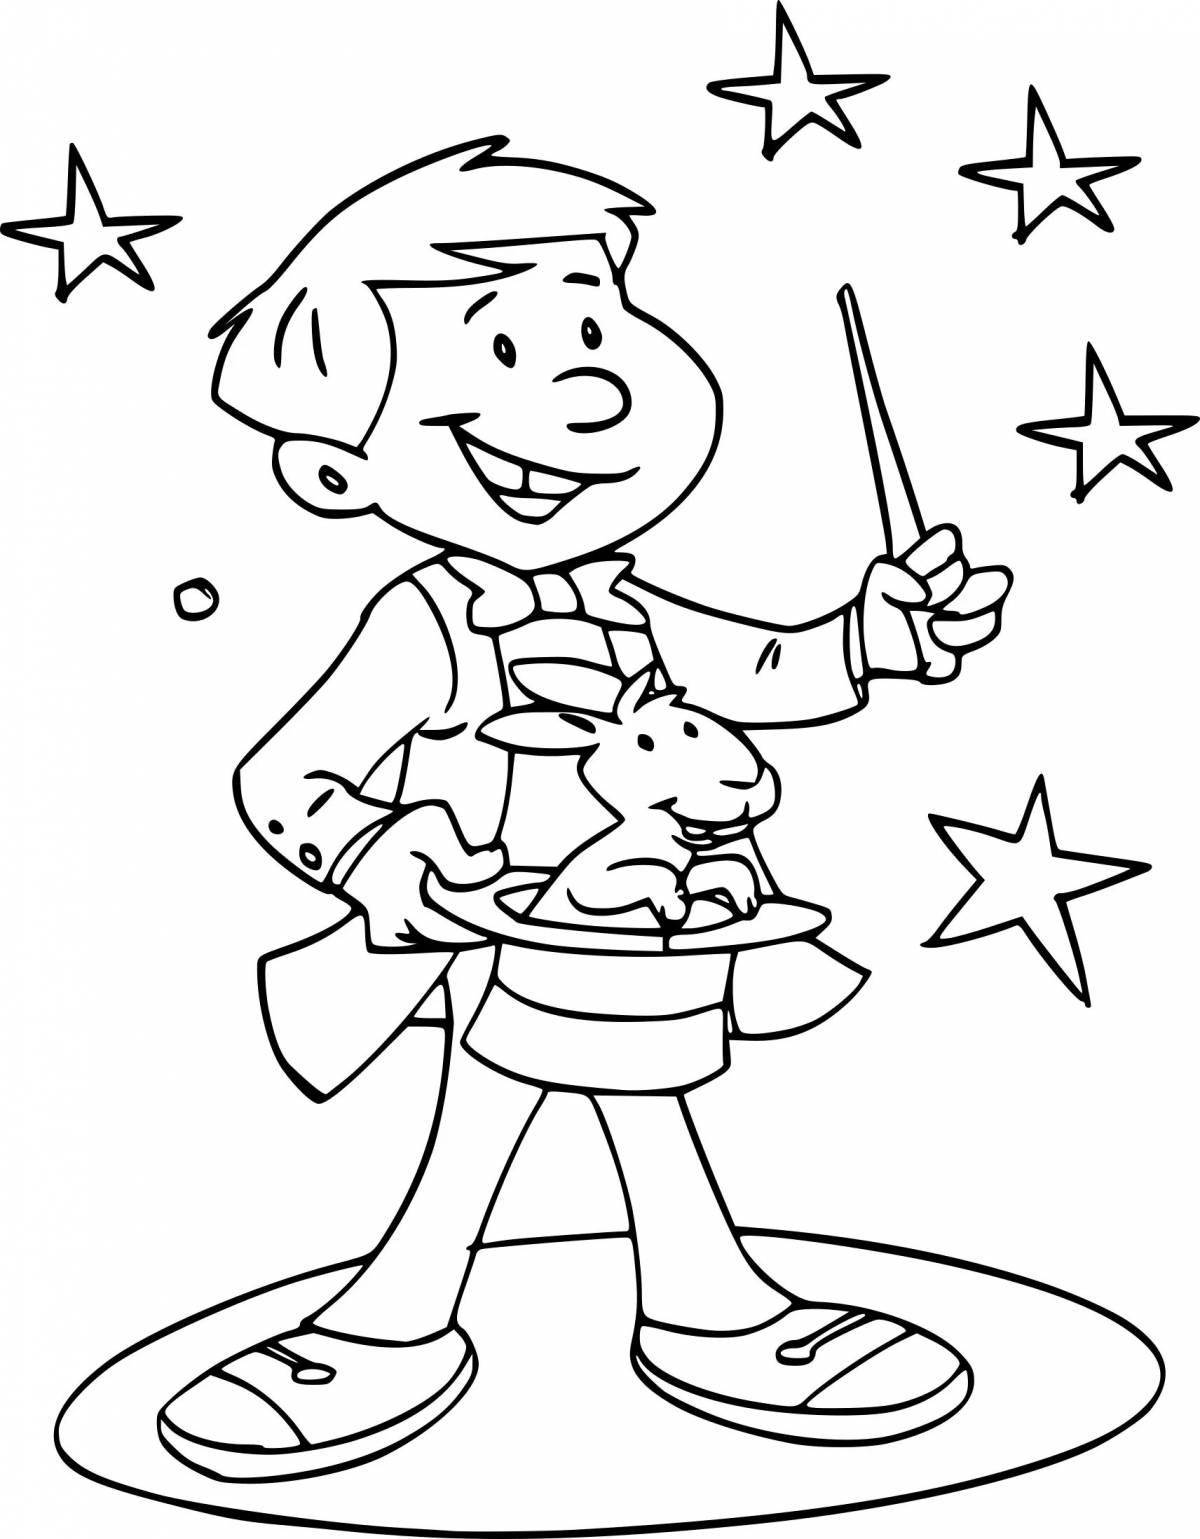 Playful magician coloring book for kids